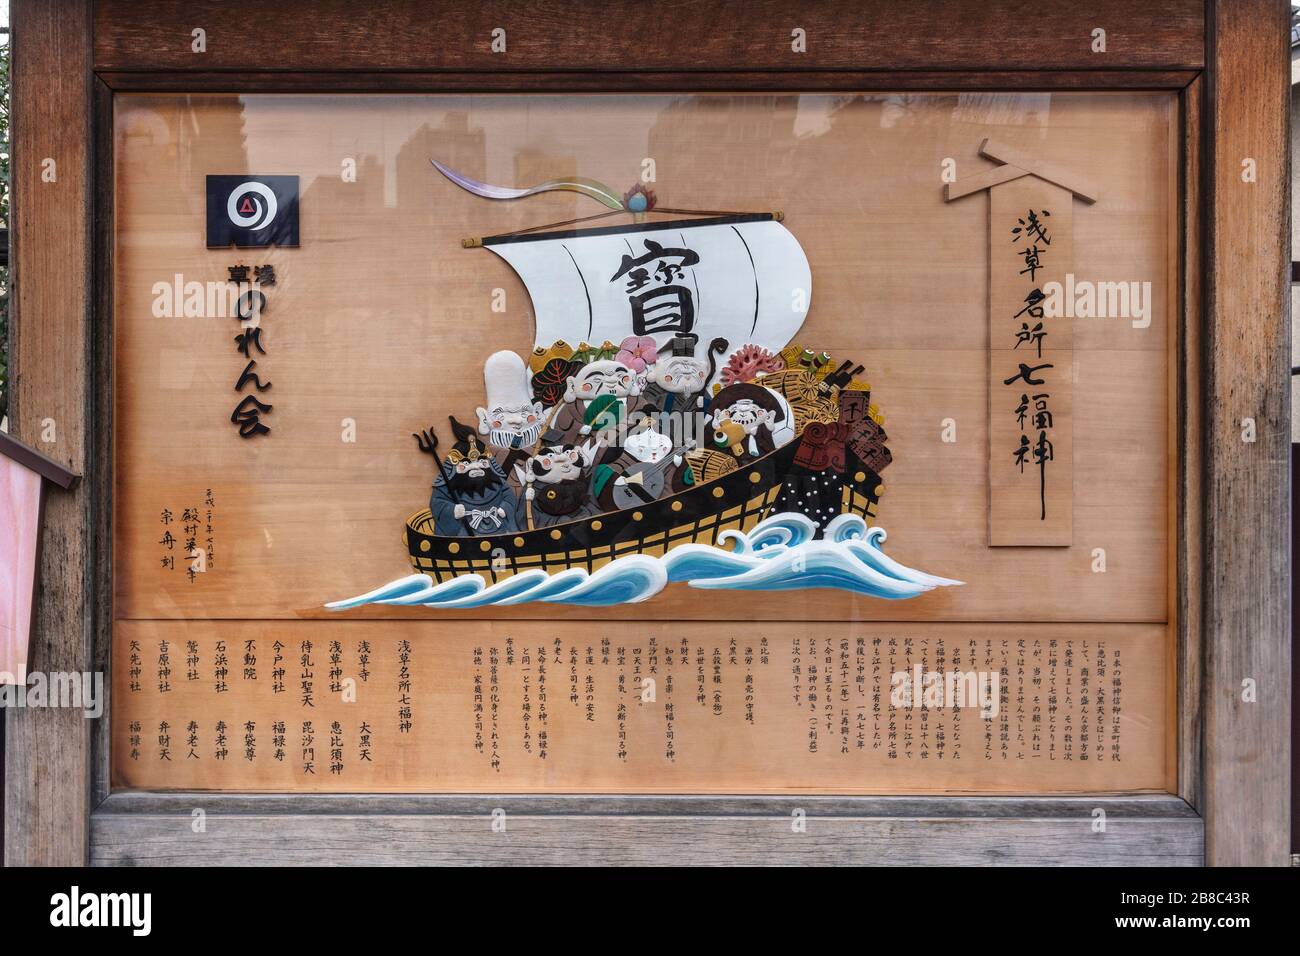 tokyo, japan - january 28 2020: Wooden signs depicting the seven Japanese gods of happiness on their Takarabune treasure ship in the Nakamise shopping Stock Photo